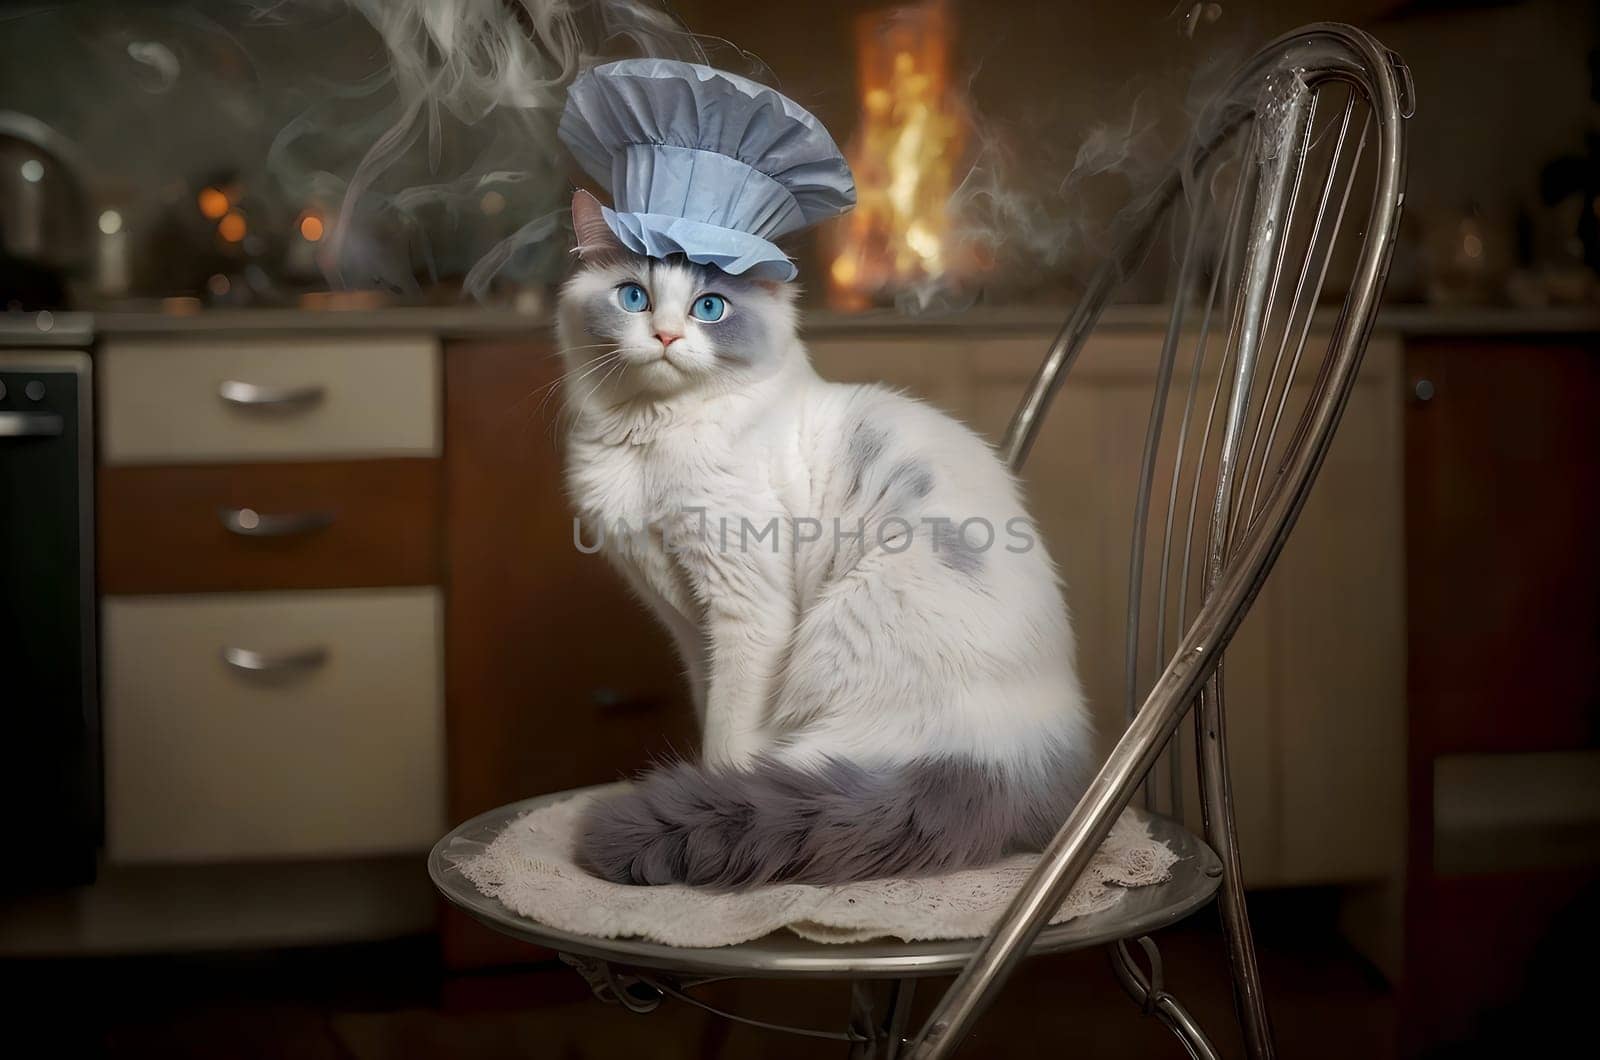 A cat cook sits on a chair in the kitchen during a fire. by Rawlik